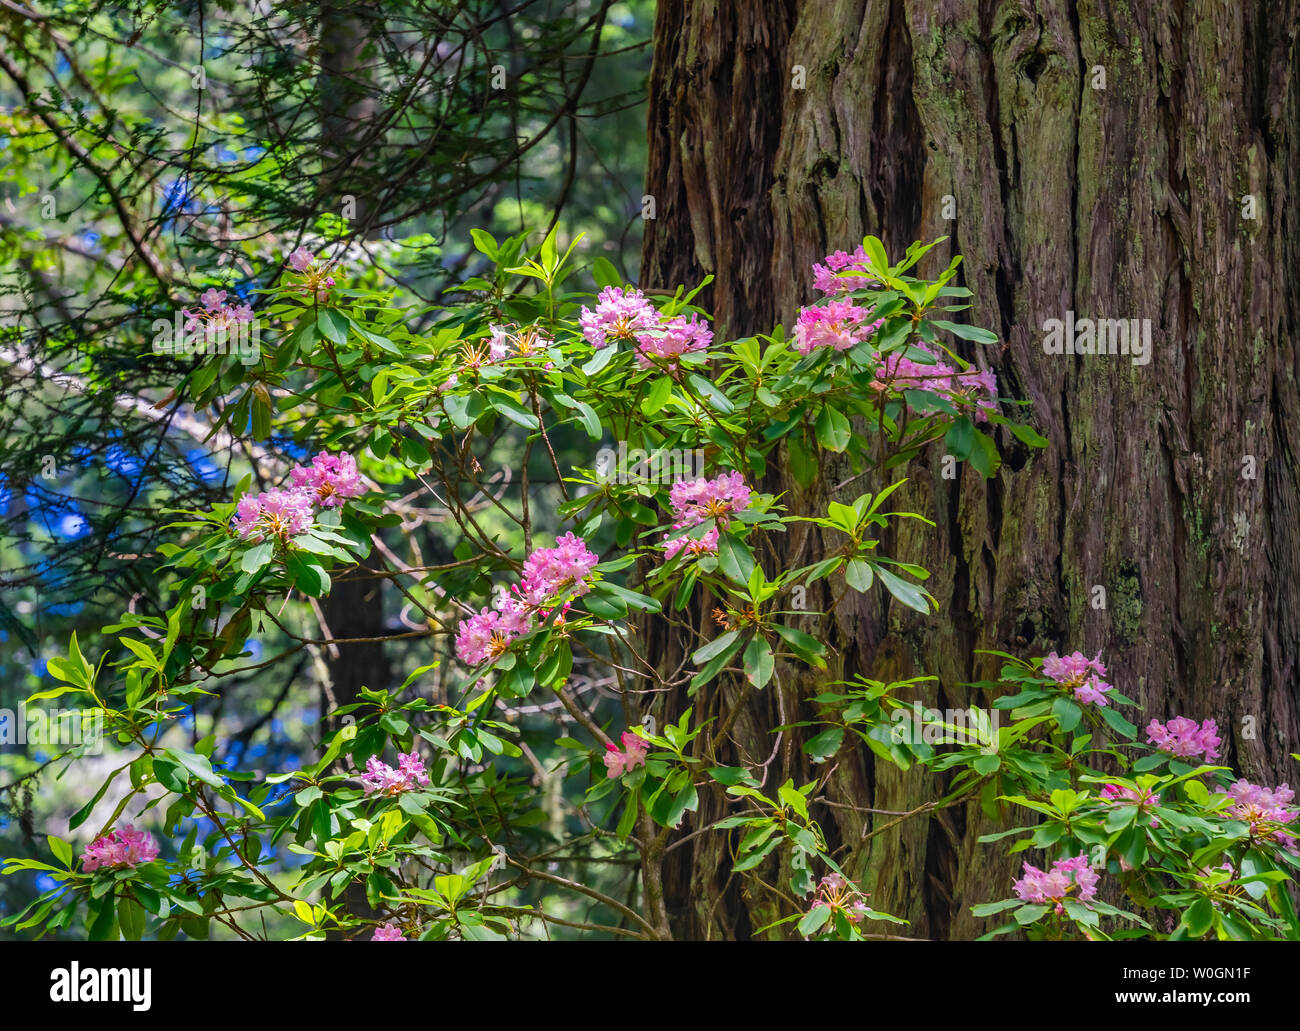 Green Large Trees Pink Rhododendron Lady Bird Johnson Grove Redwoods National Park California. Tallest trees in  World, 1000s of year old, size large Stock Photo